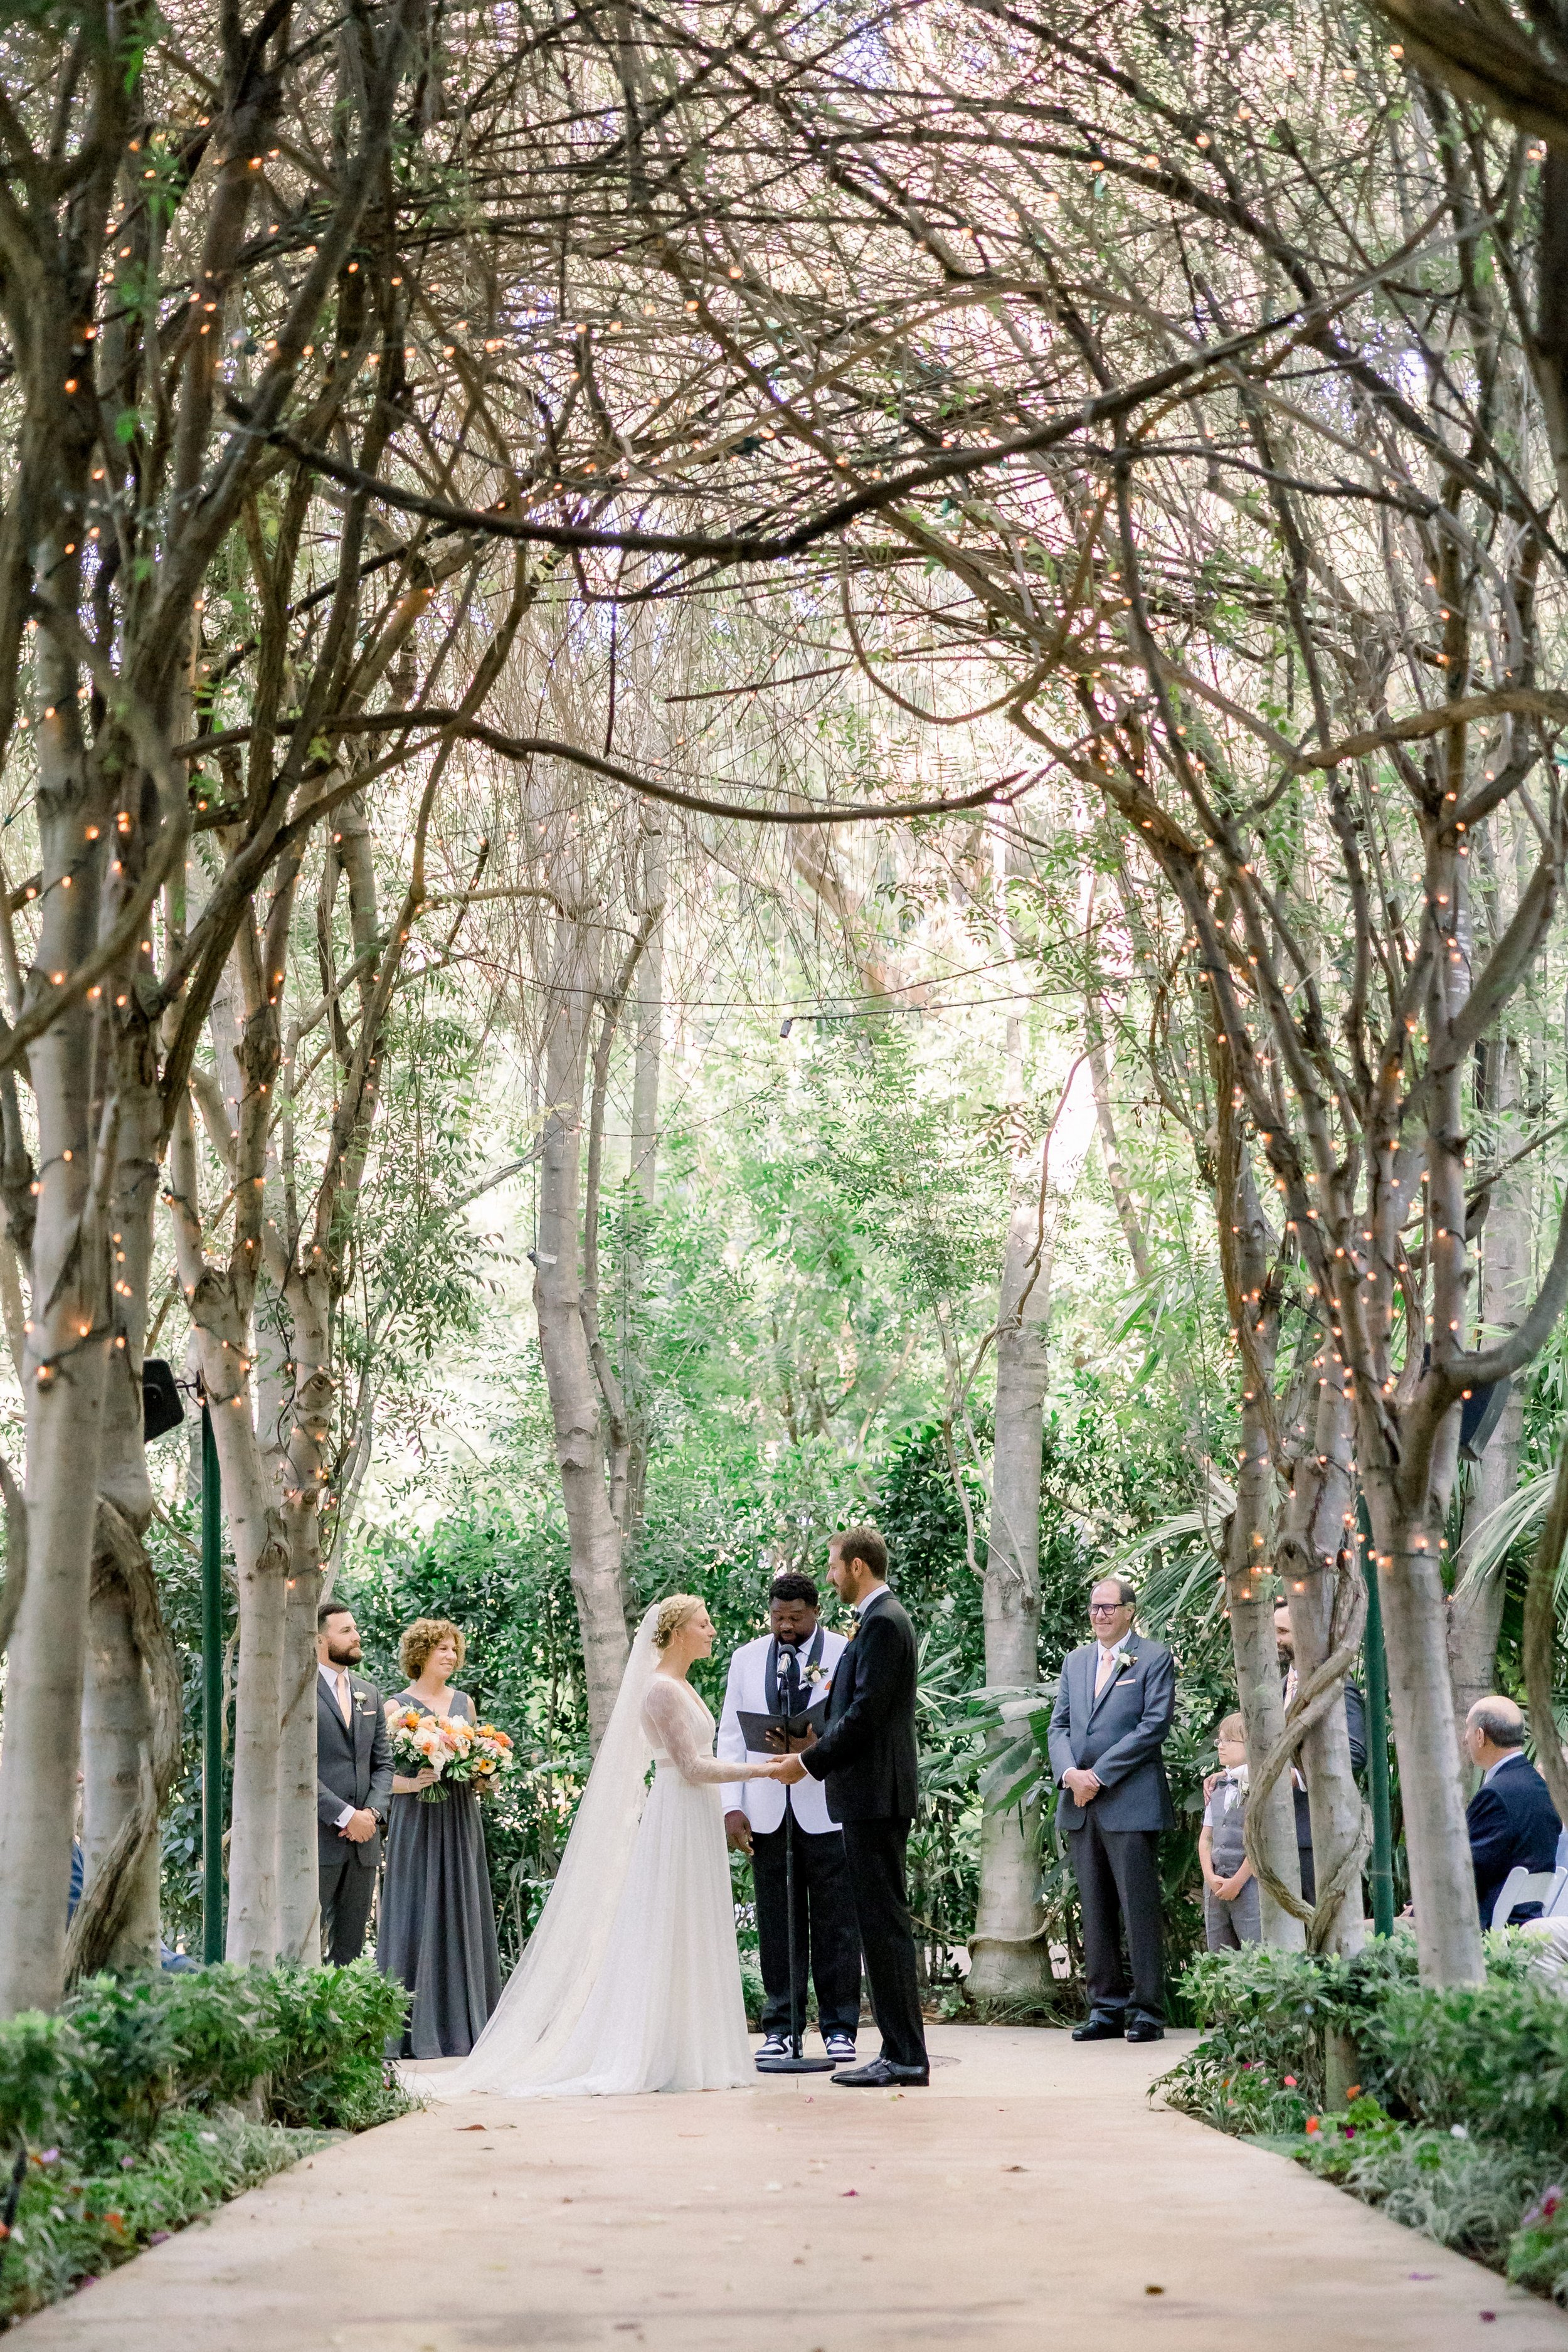 LA couple get married at outdoor, whimsical venue, hartley botanica